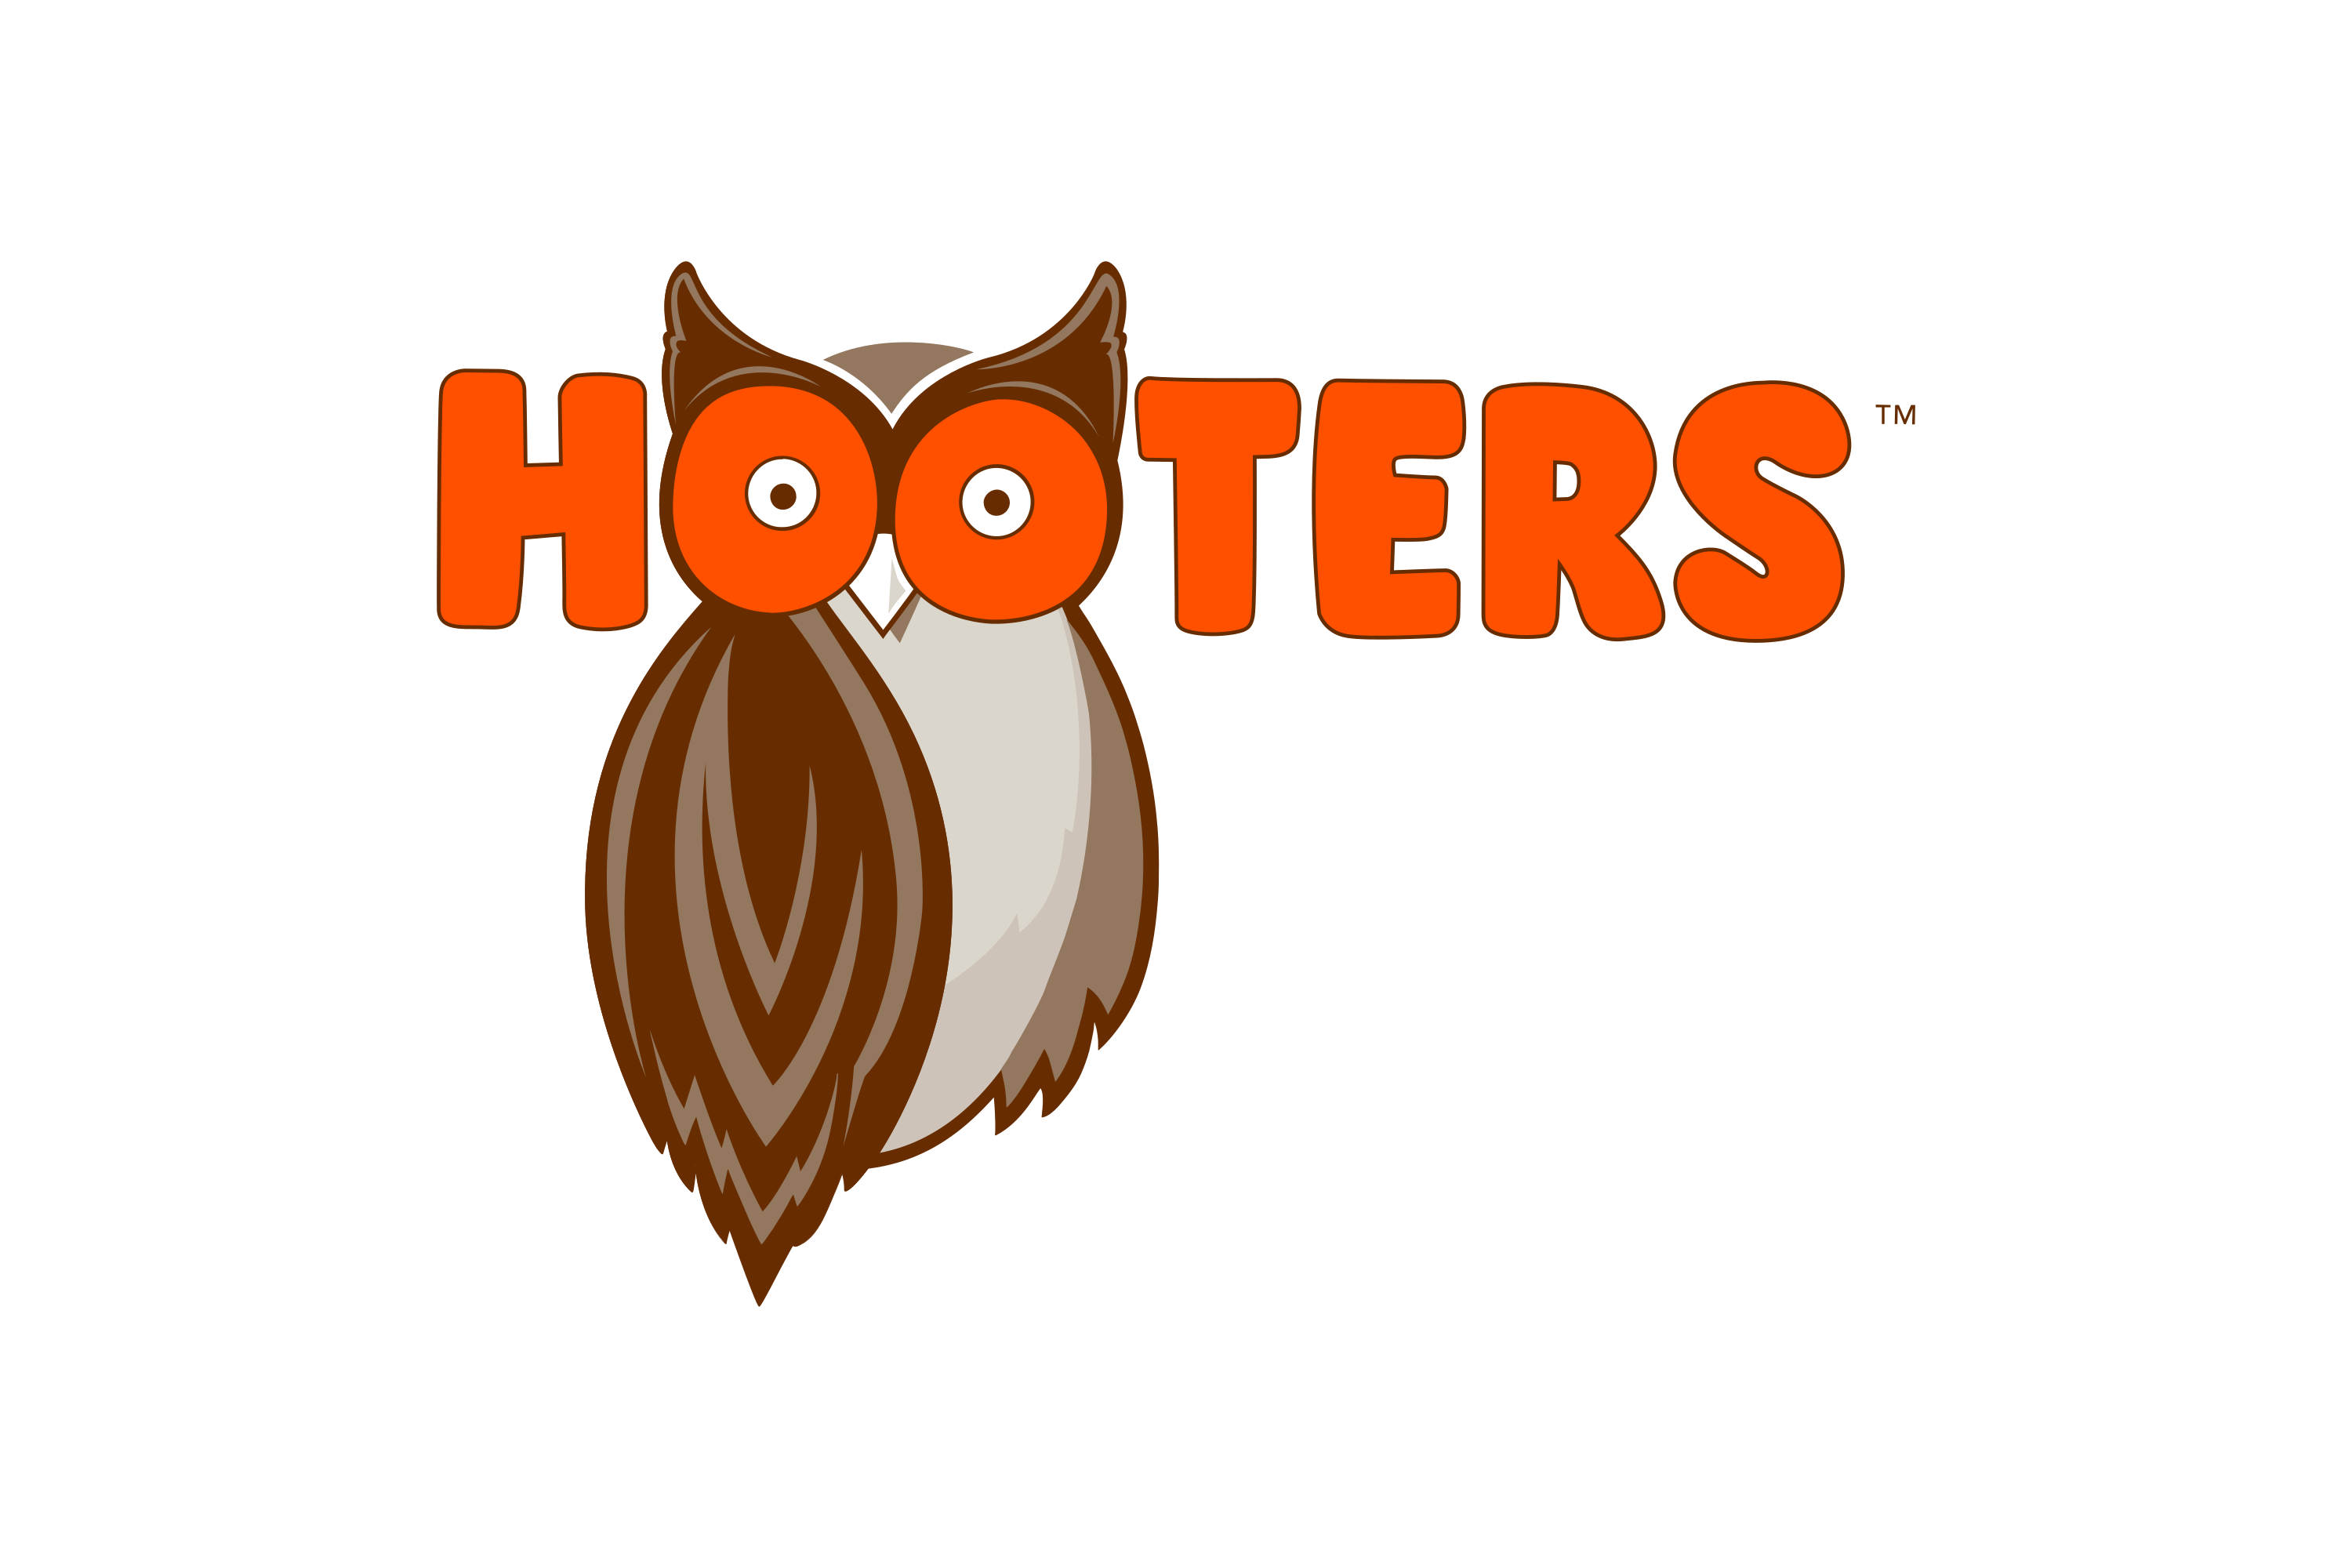 Download Hooters Logo in SVG Vector or PNG File Format - Logo.wine